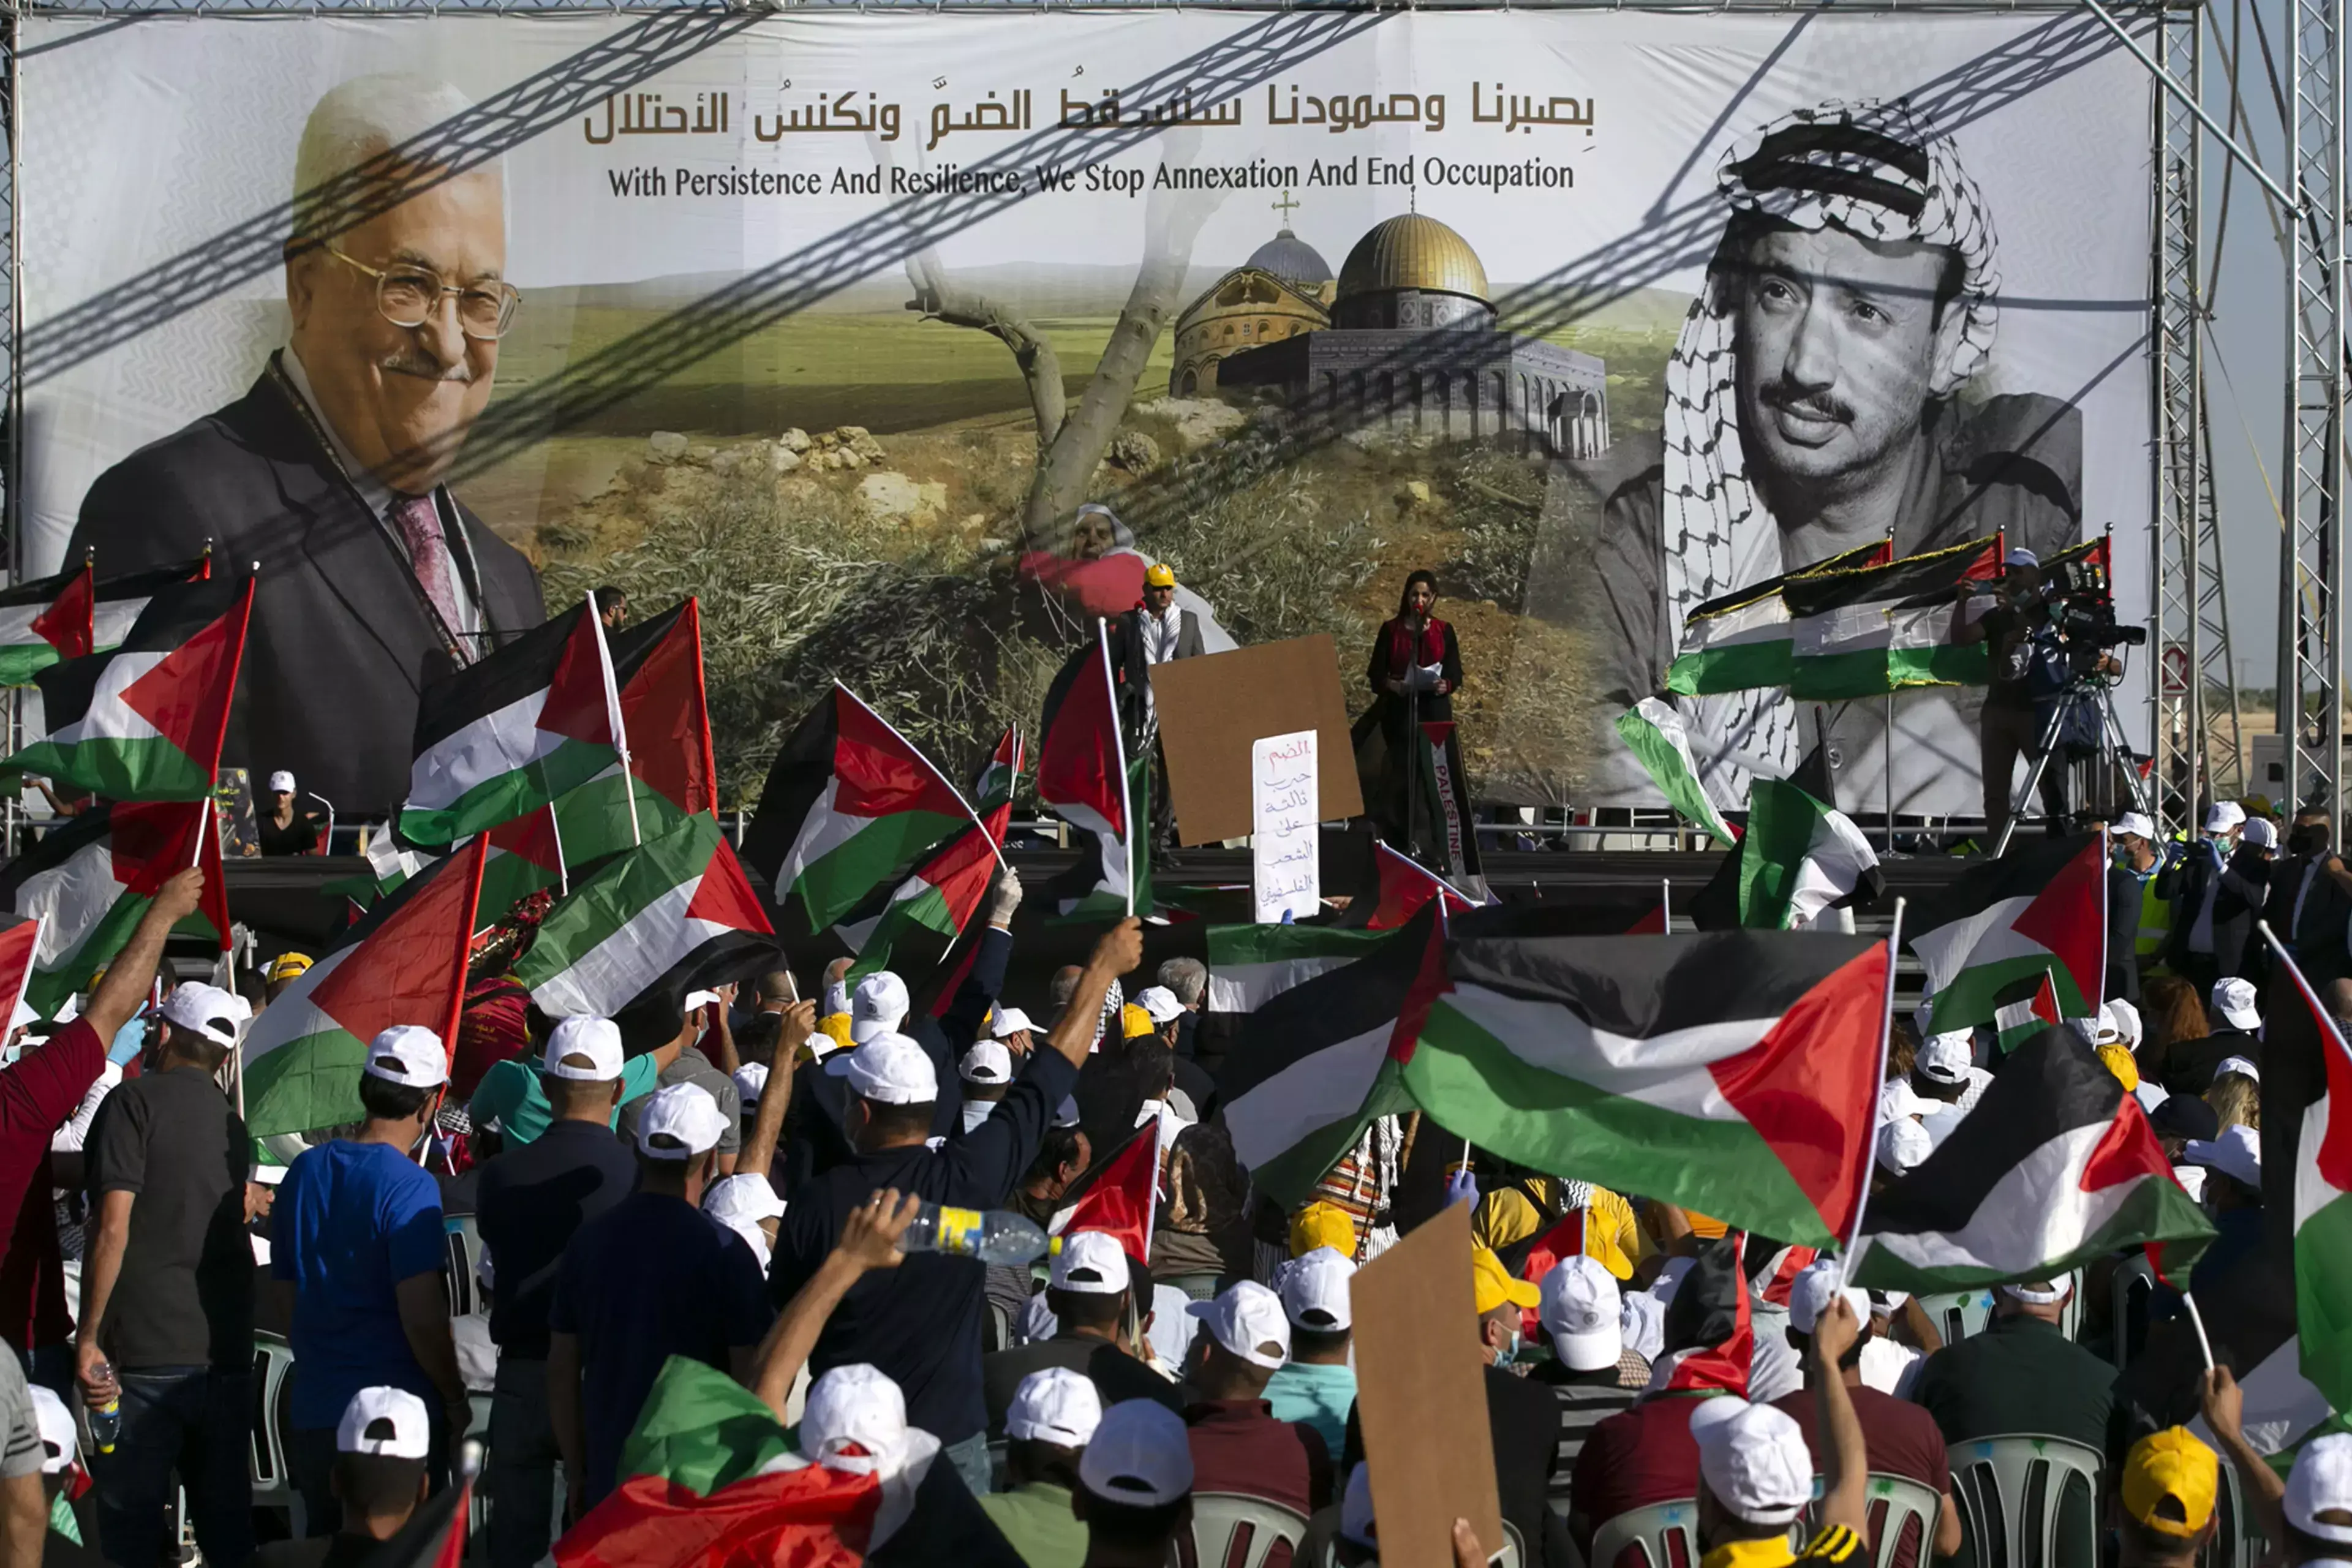 Palestinians rally beneath images of President Mahmoud Abbas and his predecessor, Yasser Arafat.